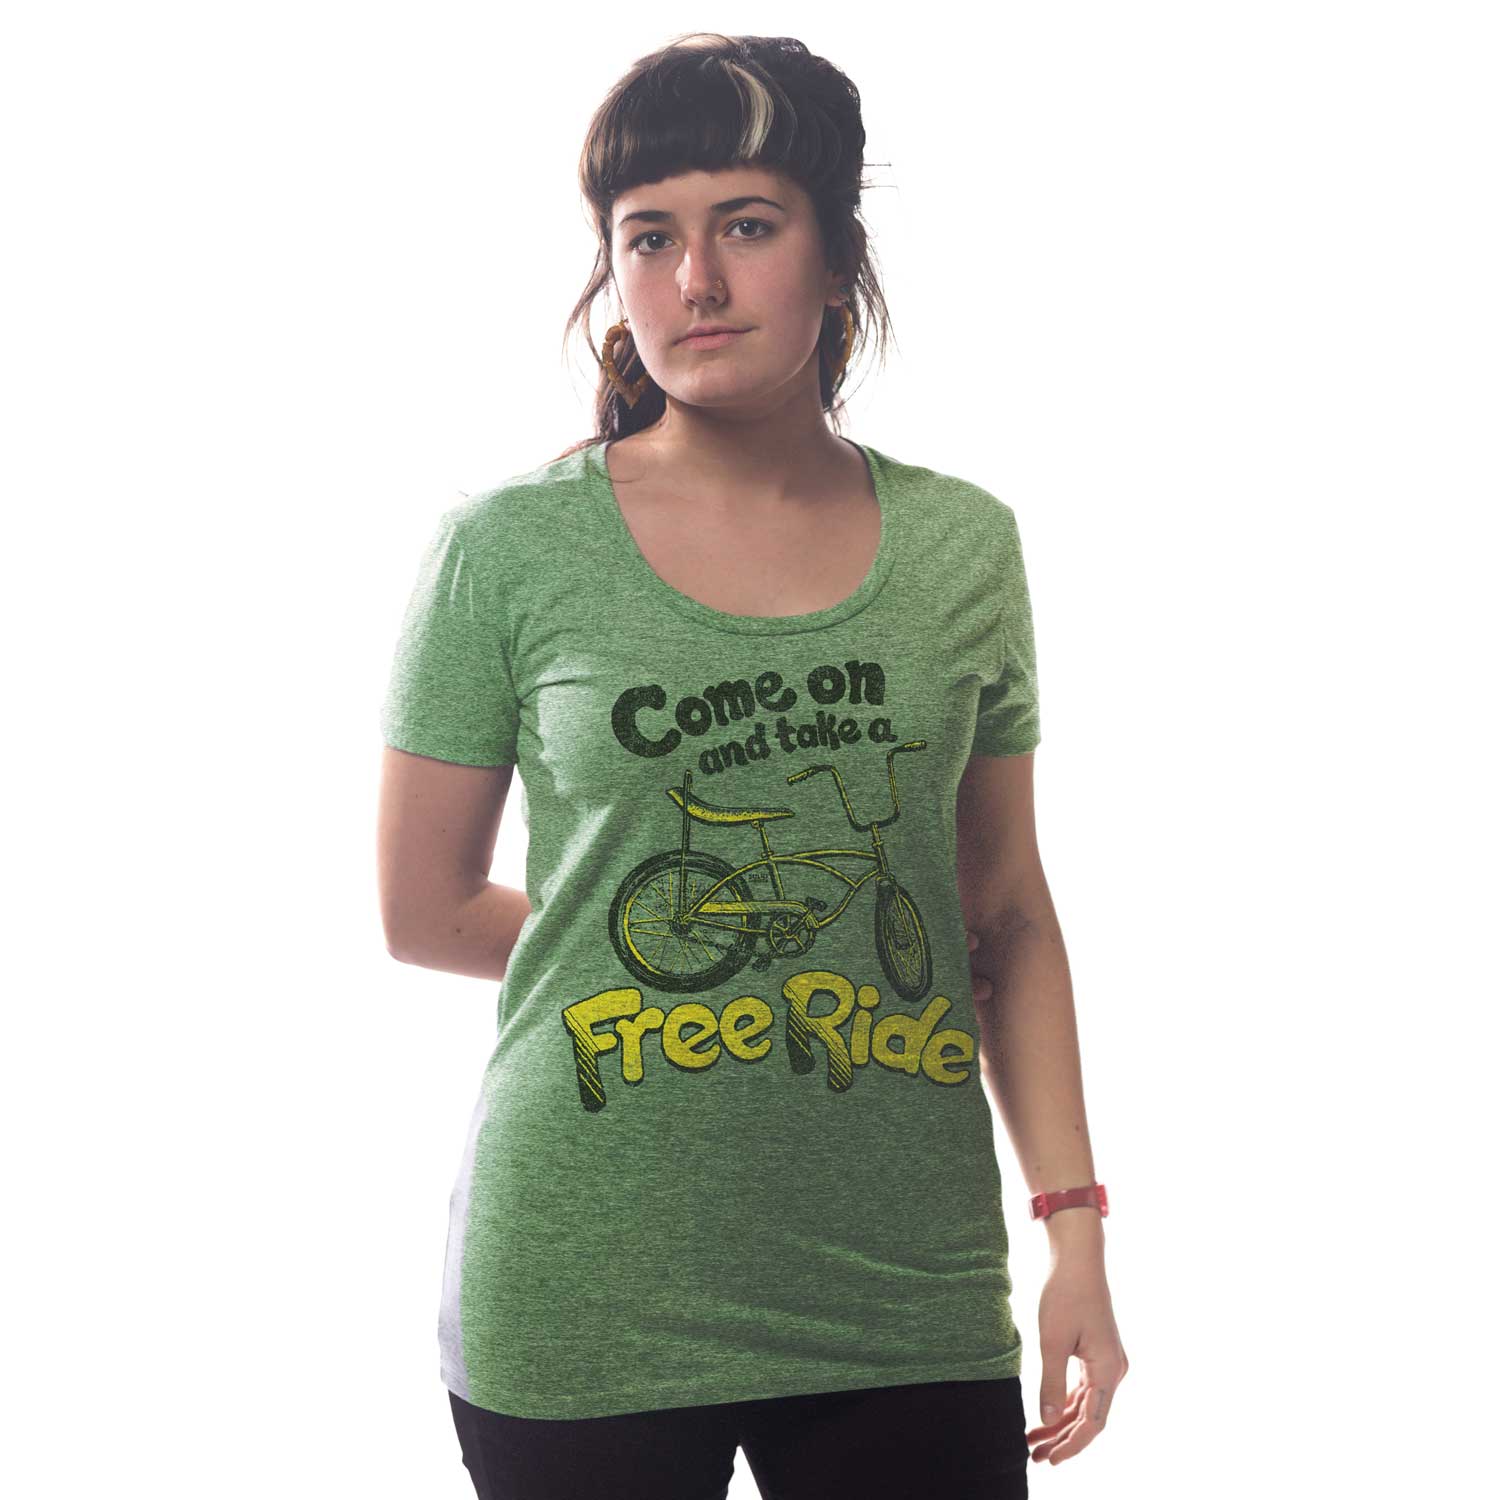 Women's Come On and Take a Free Ride Vintage Inspired T-shirt | Retro Bicycle Graphic Tee | Solid Threads